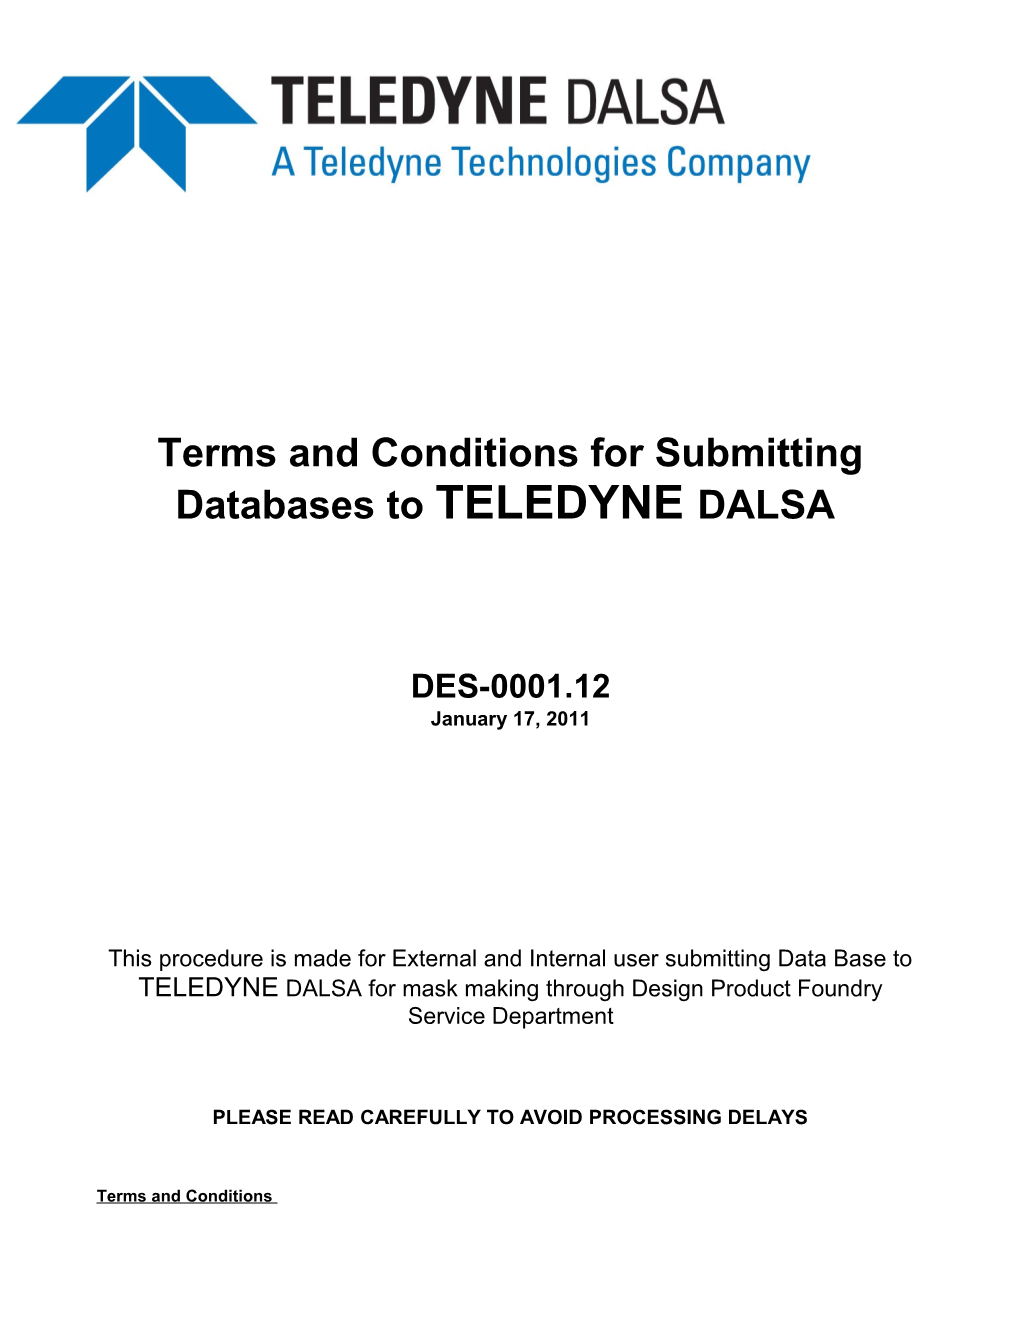 Terms and Conditions for Submitting Databases to TELEDYNEDALSA